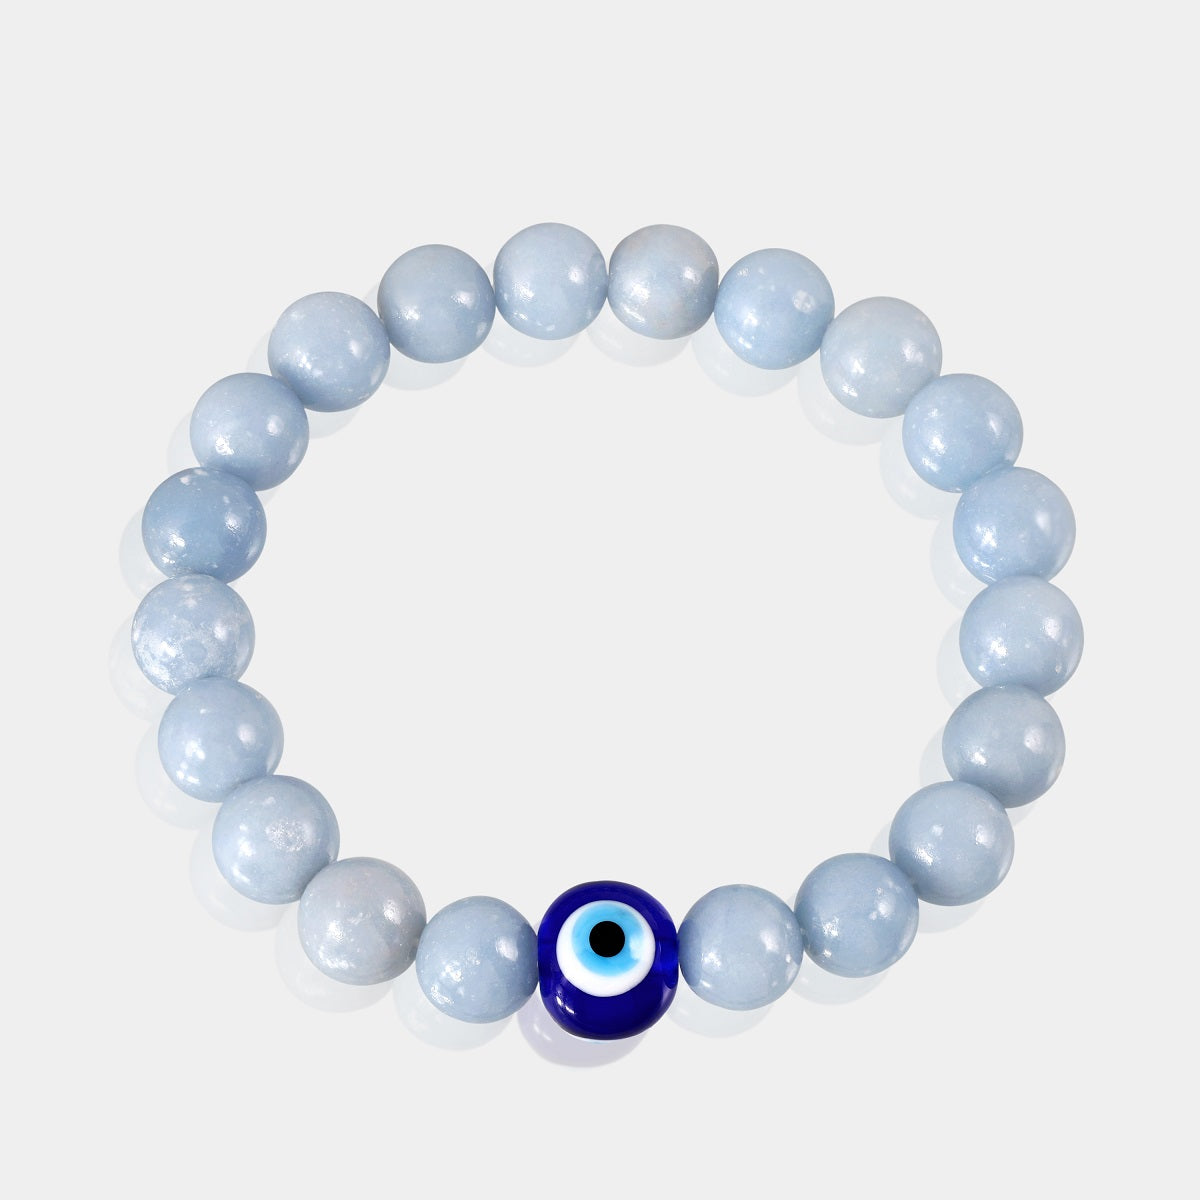 Evil Eye Beads for Protection and Positivity